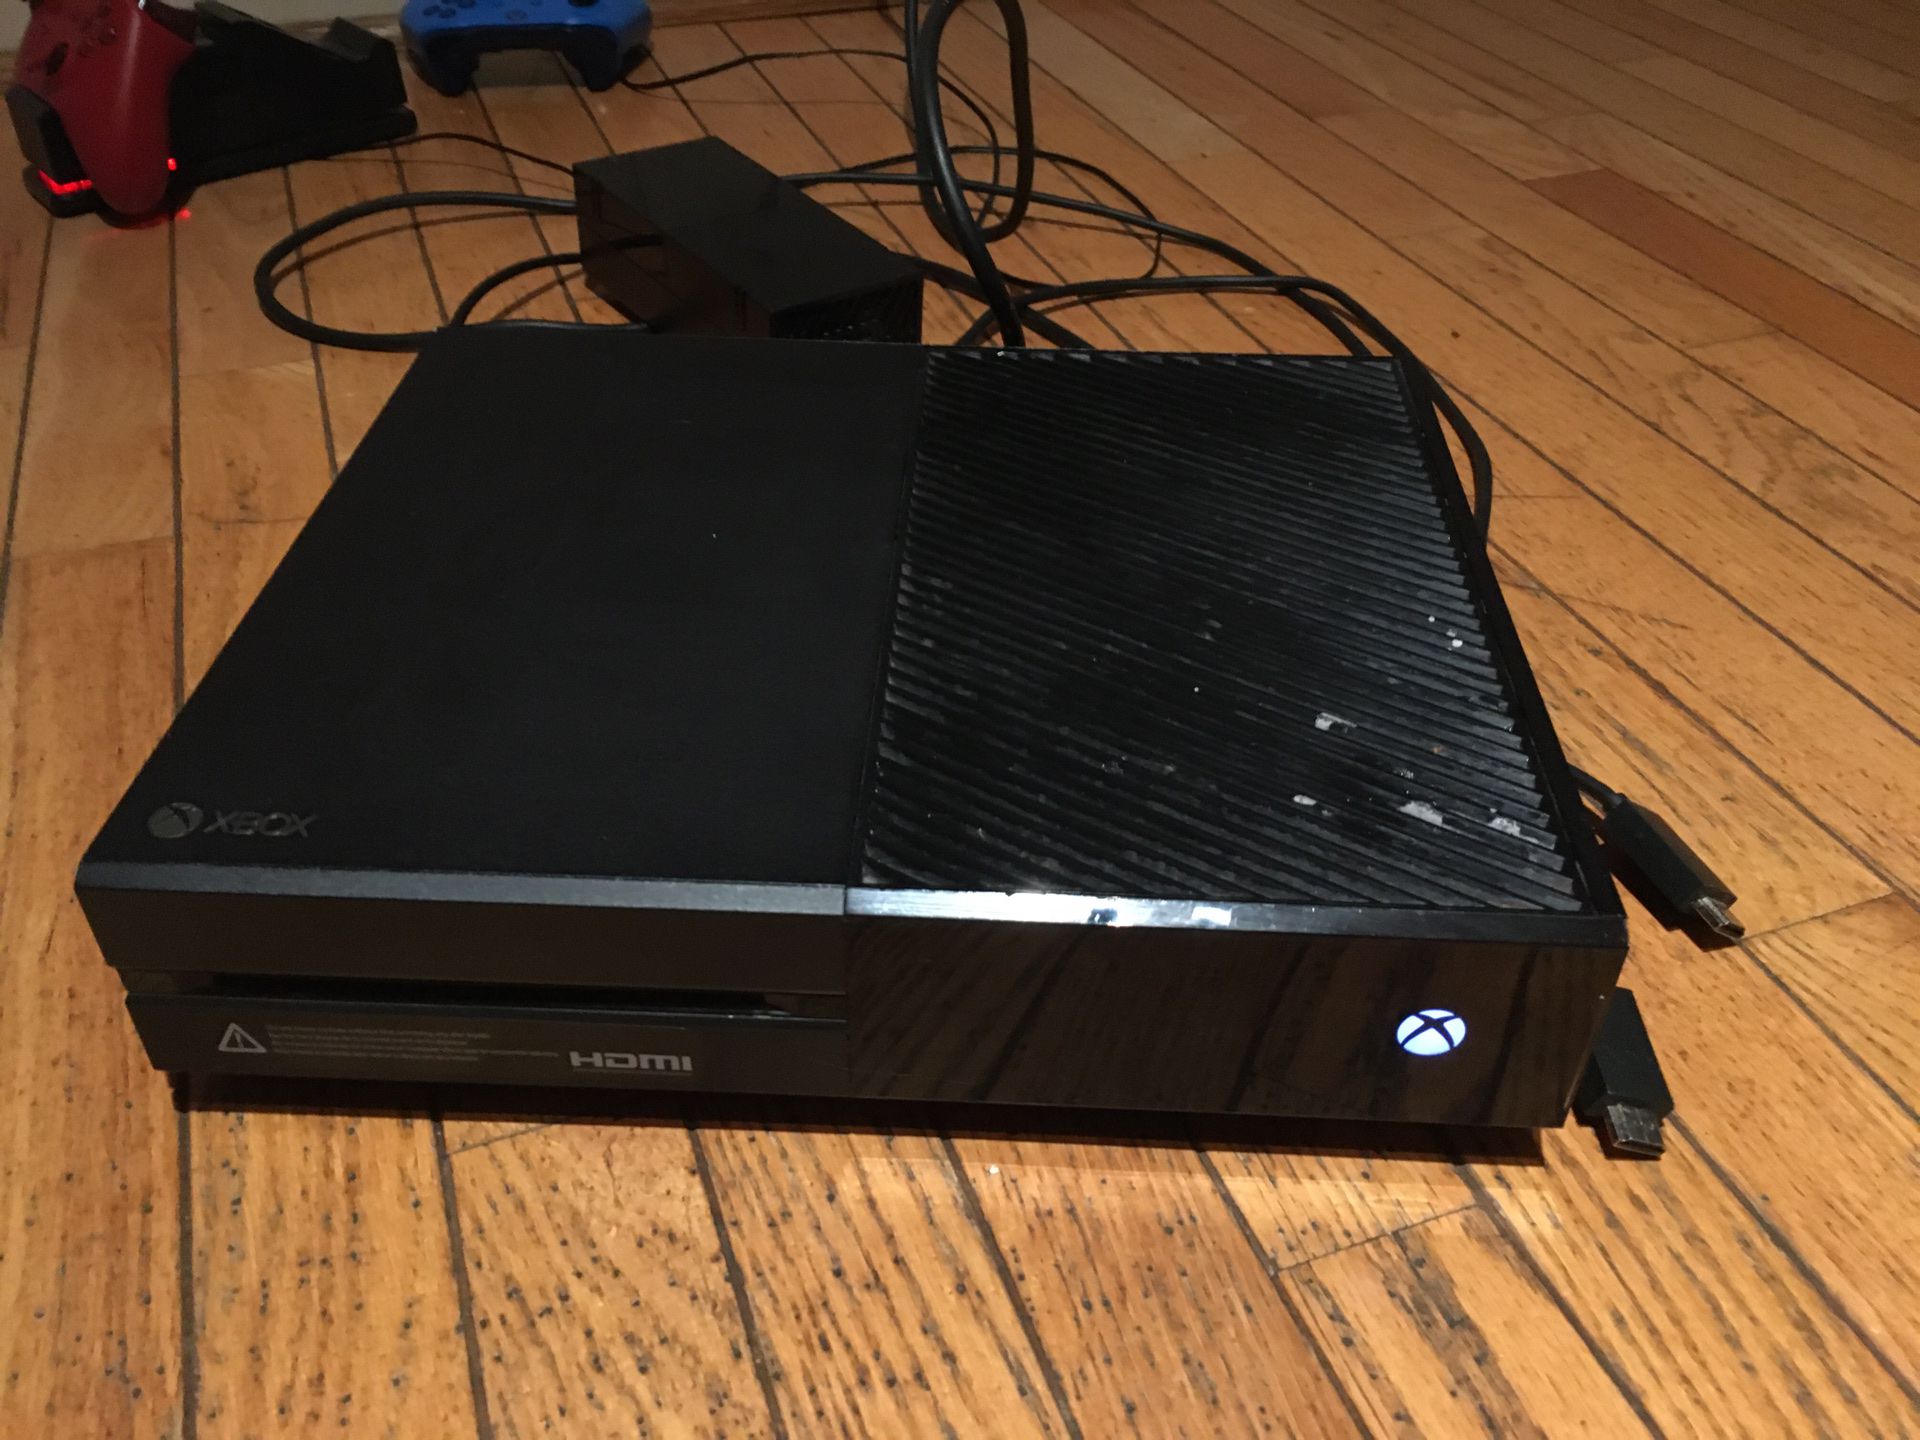 Xbox One for sale 200 cash for the whole set